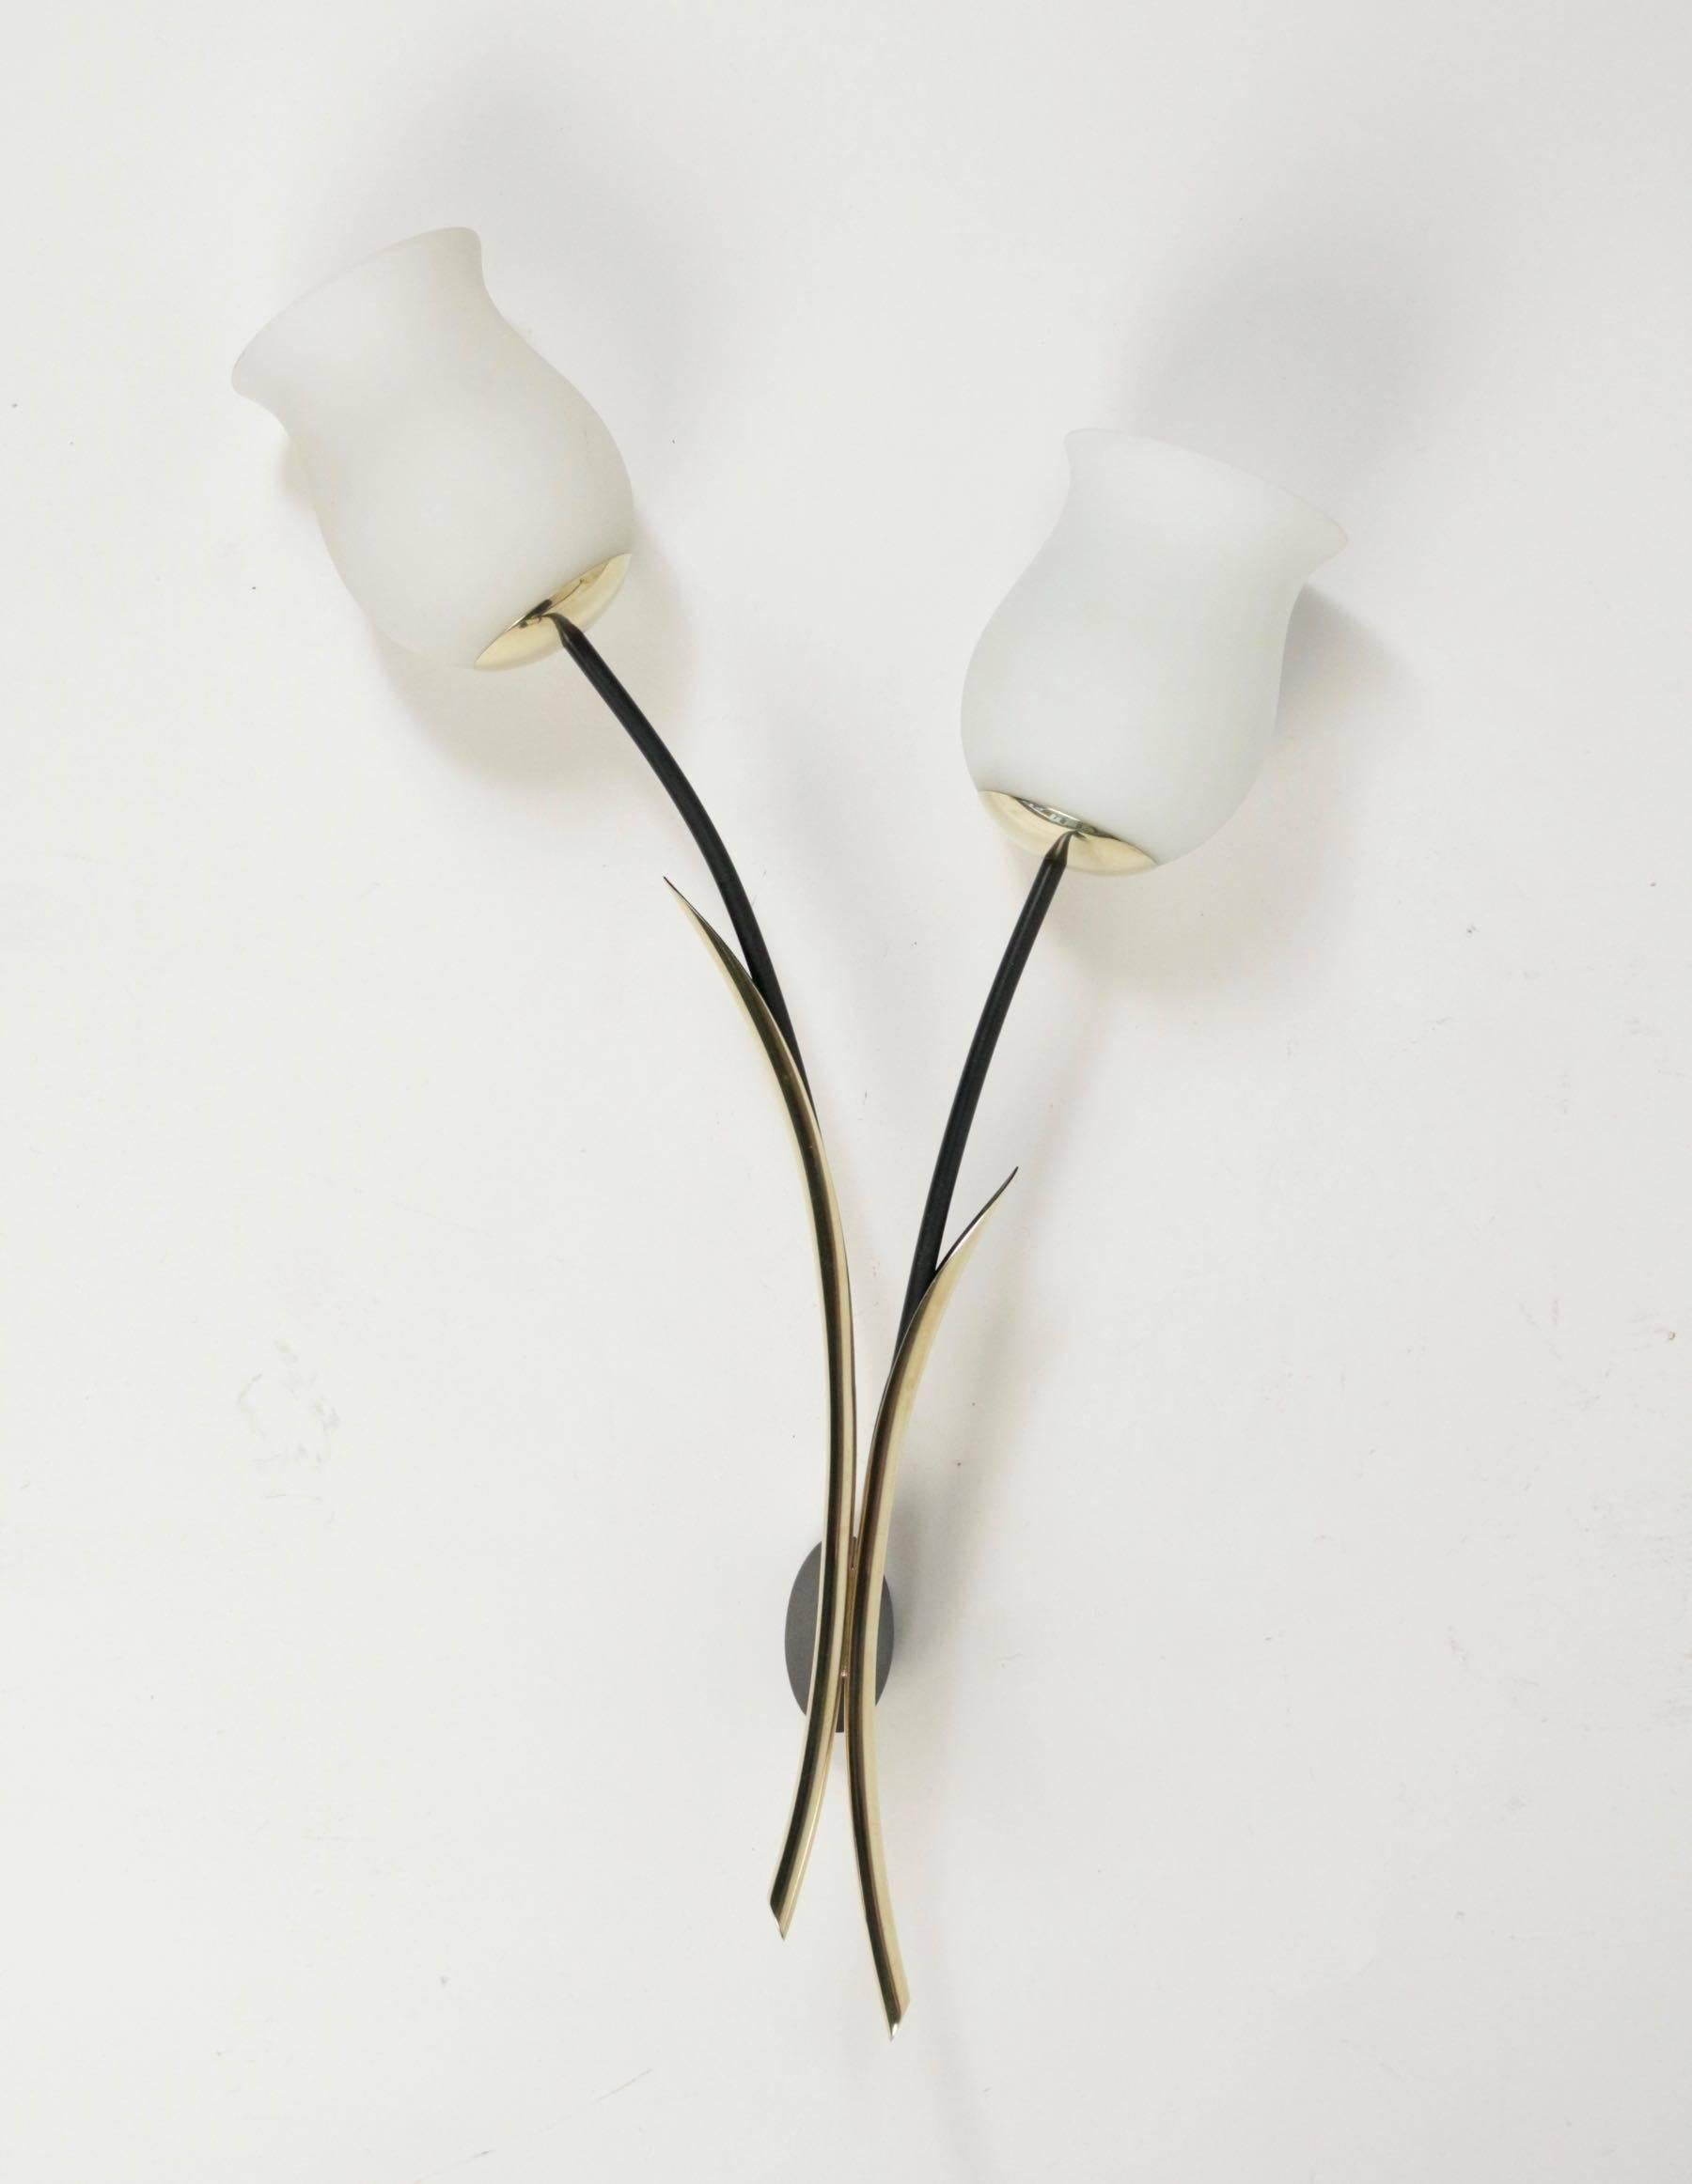 Large pair of 'Tulip' sconce, Arlus 1950.

Two black lacquered curved stem support two opaline glass lampshades in shape of tulip blossom.
Backplate made of brass with two stylized leaves.
    